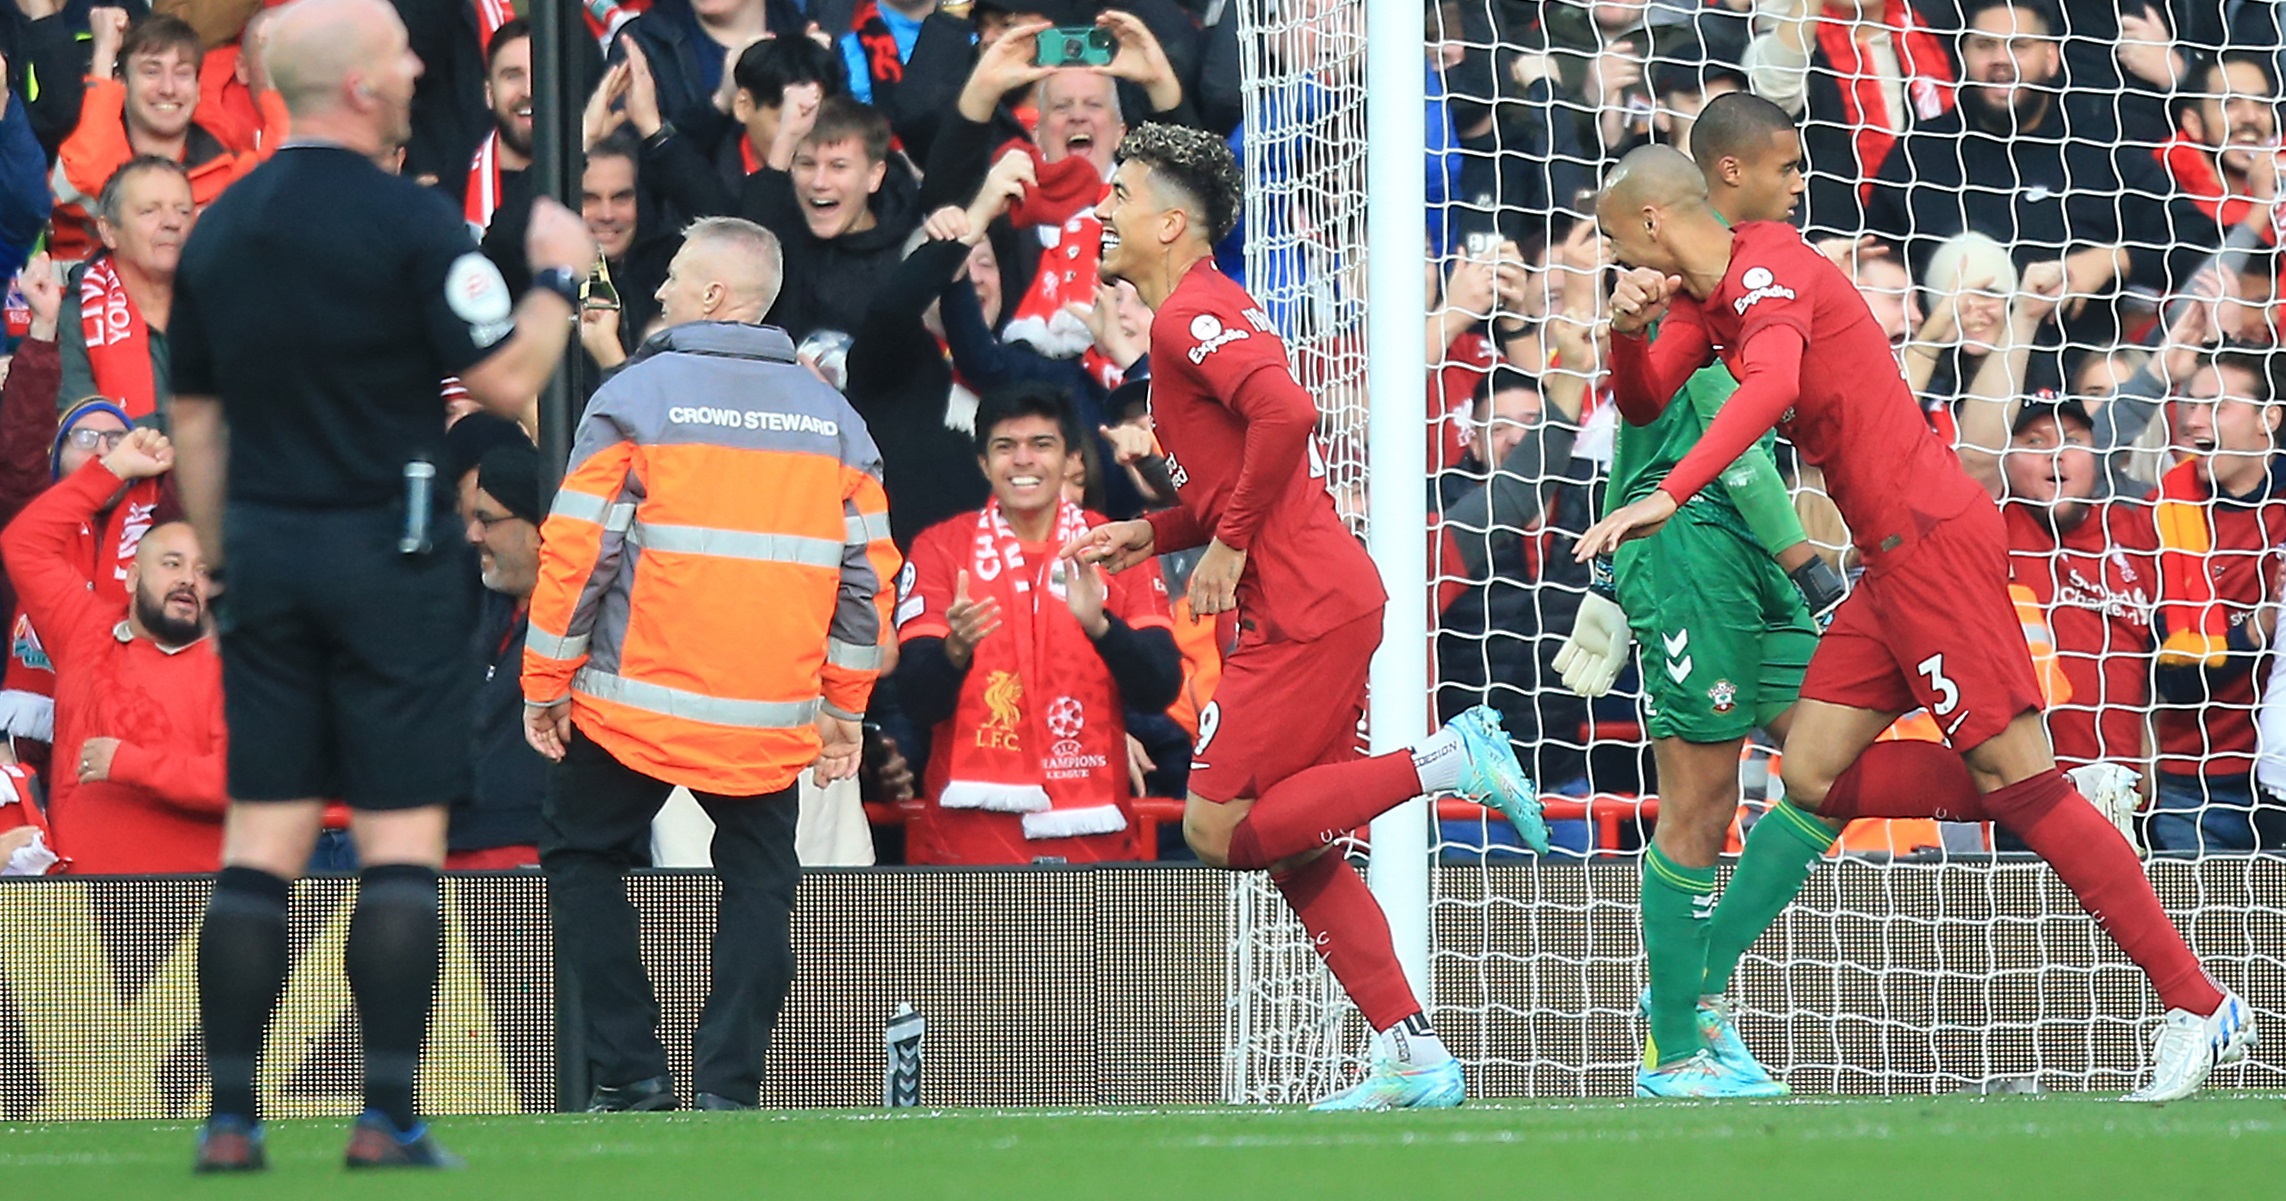 Pat Nevin compares Liverpool ace to ‘an octopus’ after superb start to Southampton clash: ‘His tentacles are all over this game’